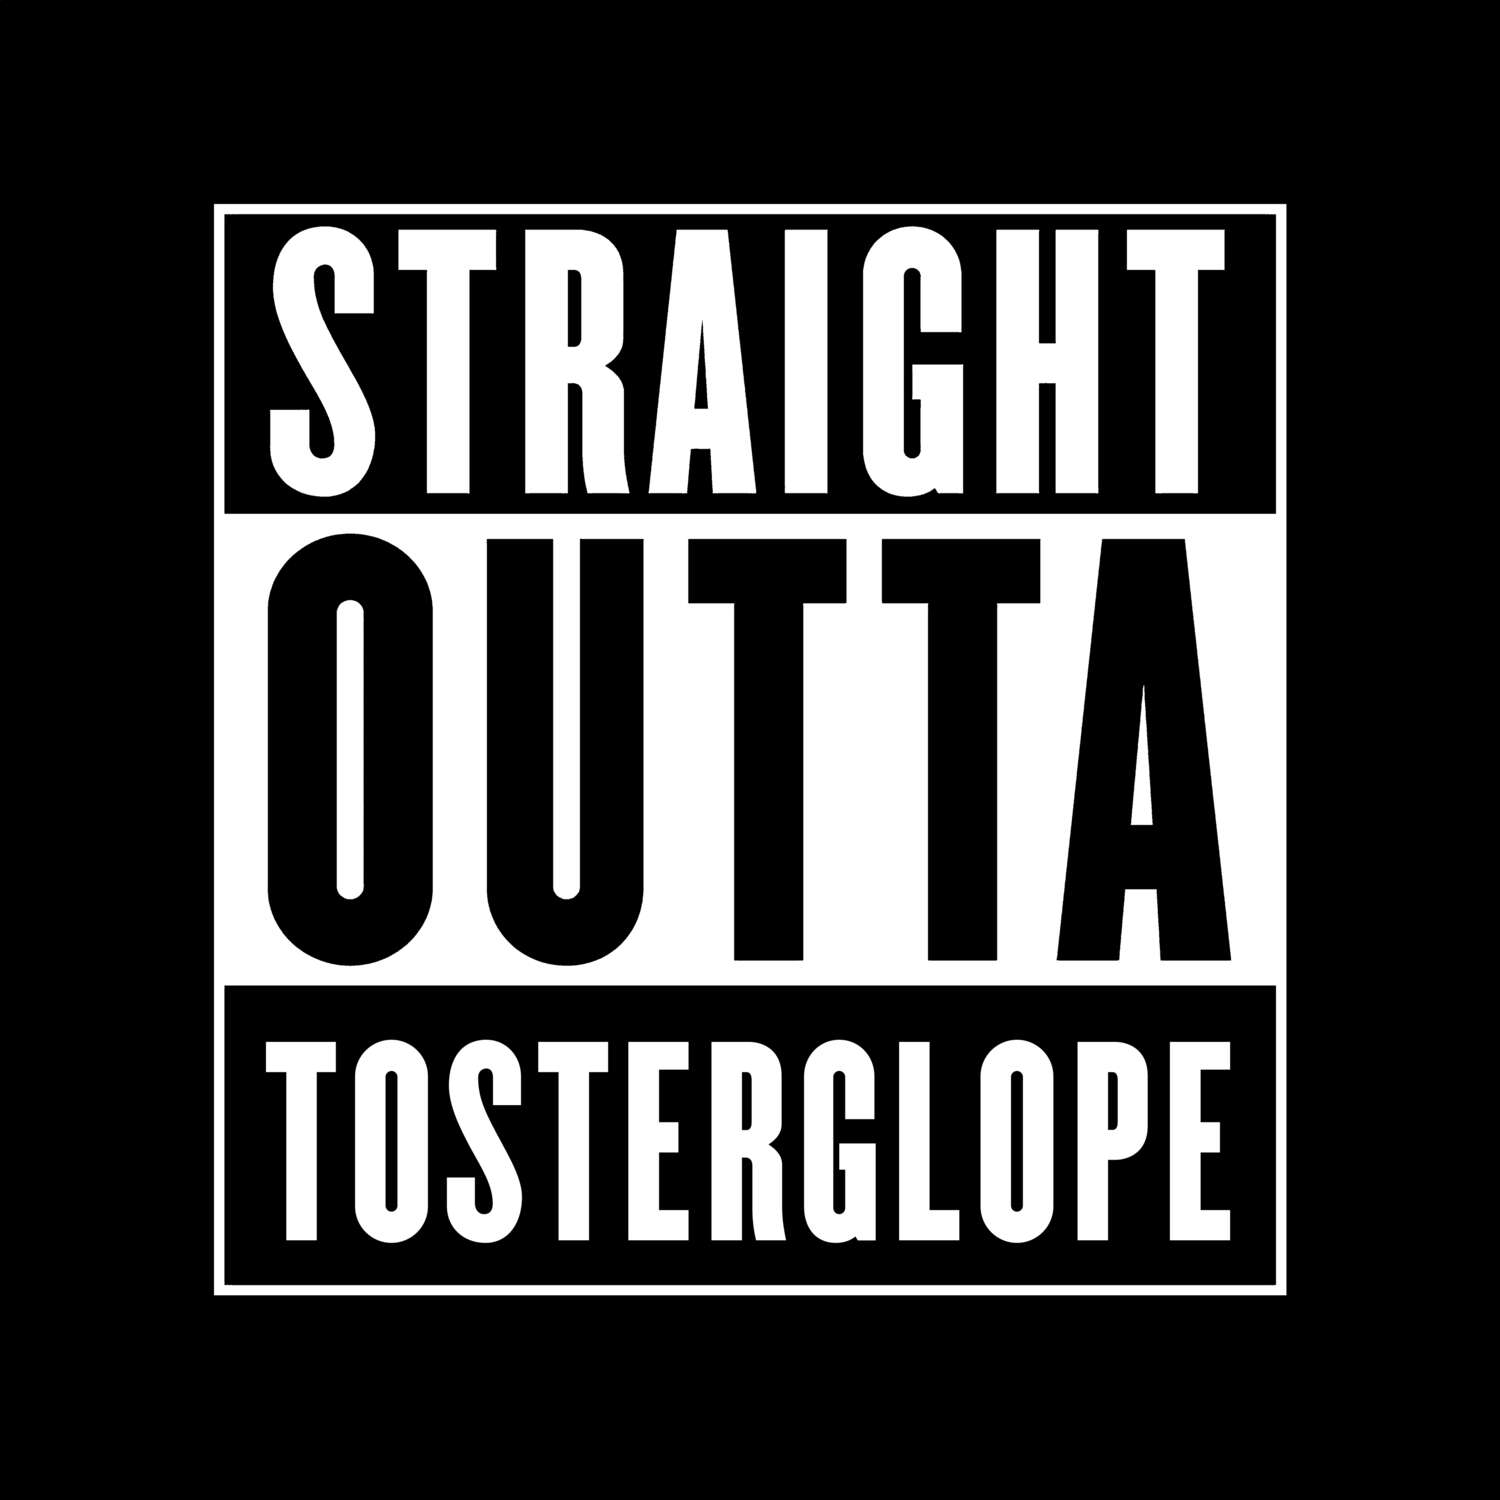 Tosterglope T-Shirt »Straight Outta«